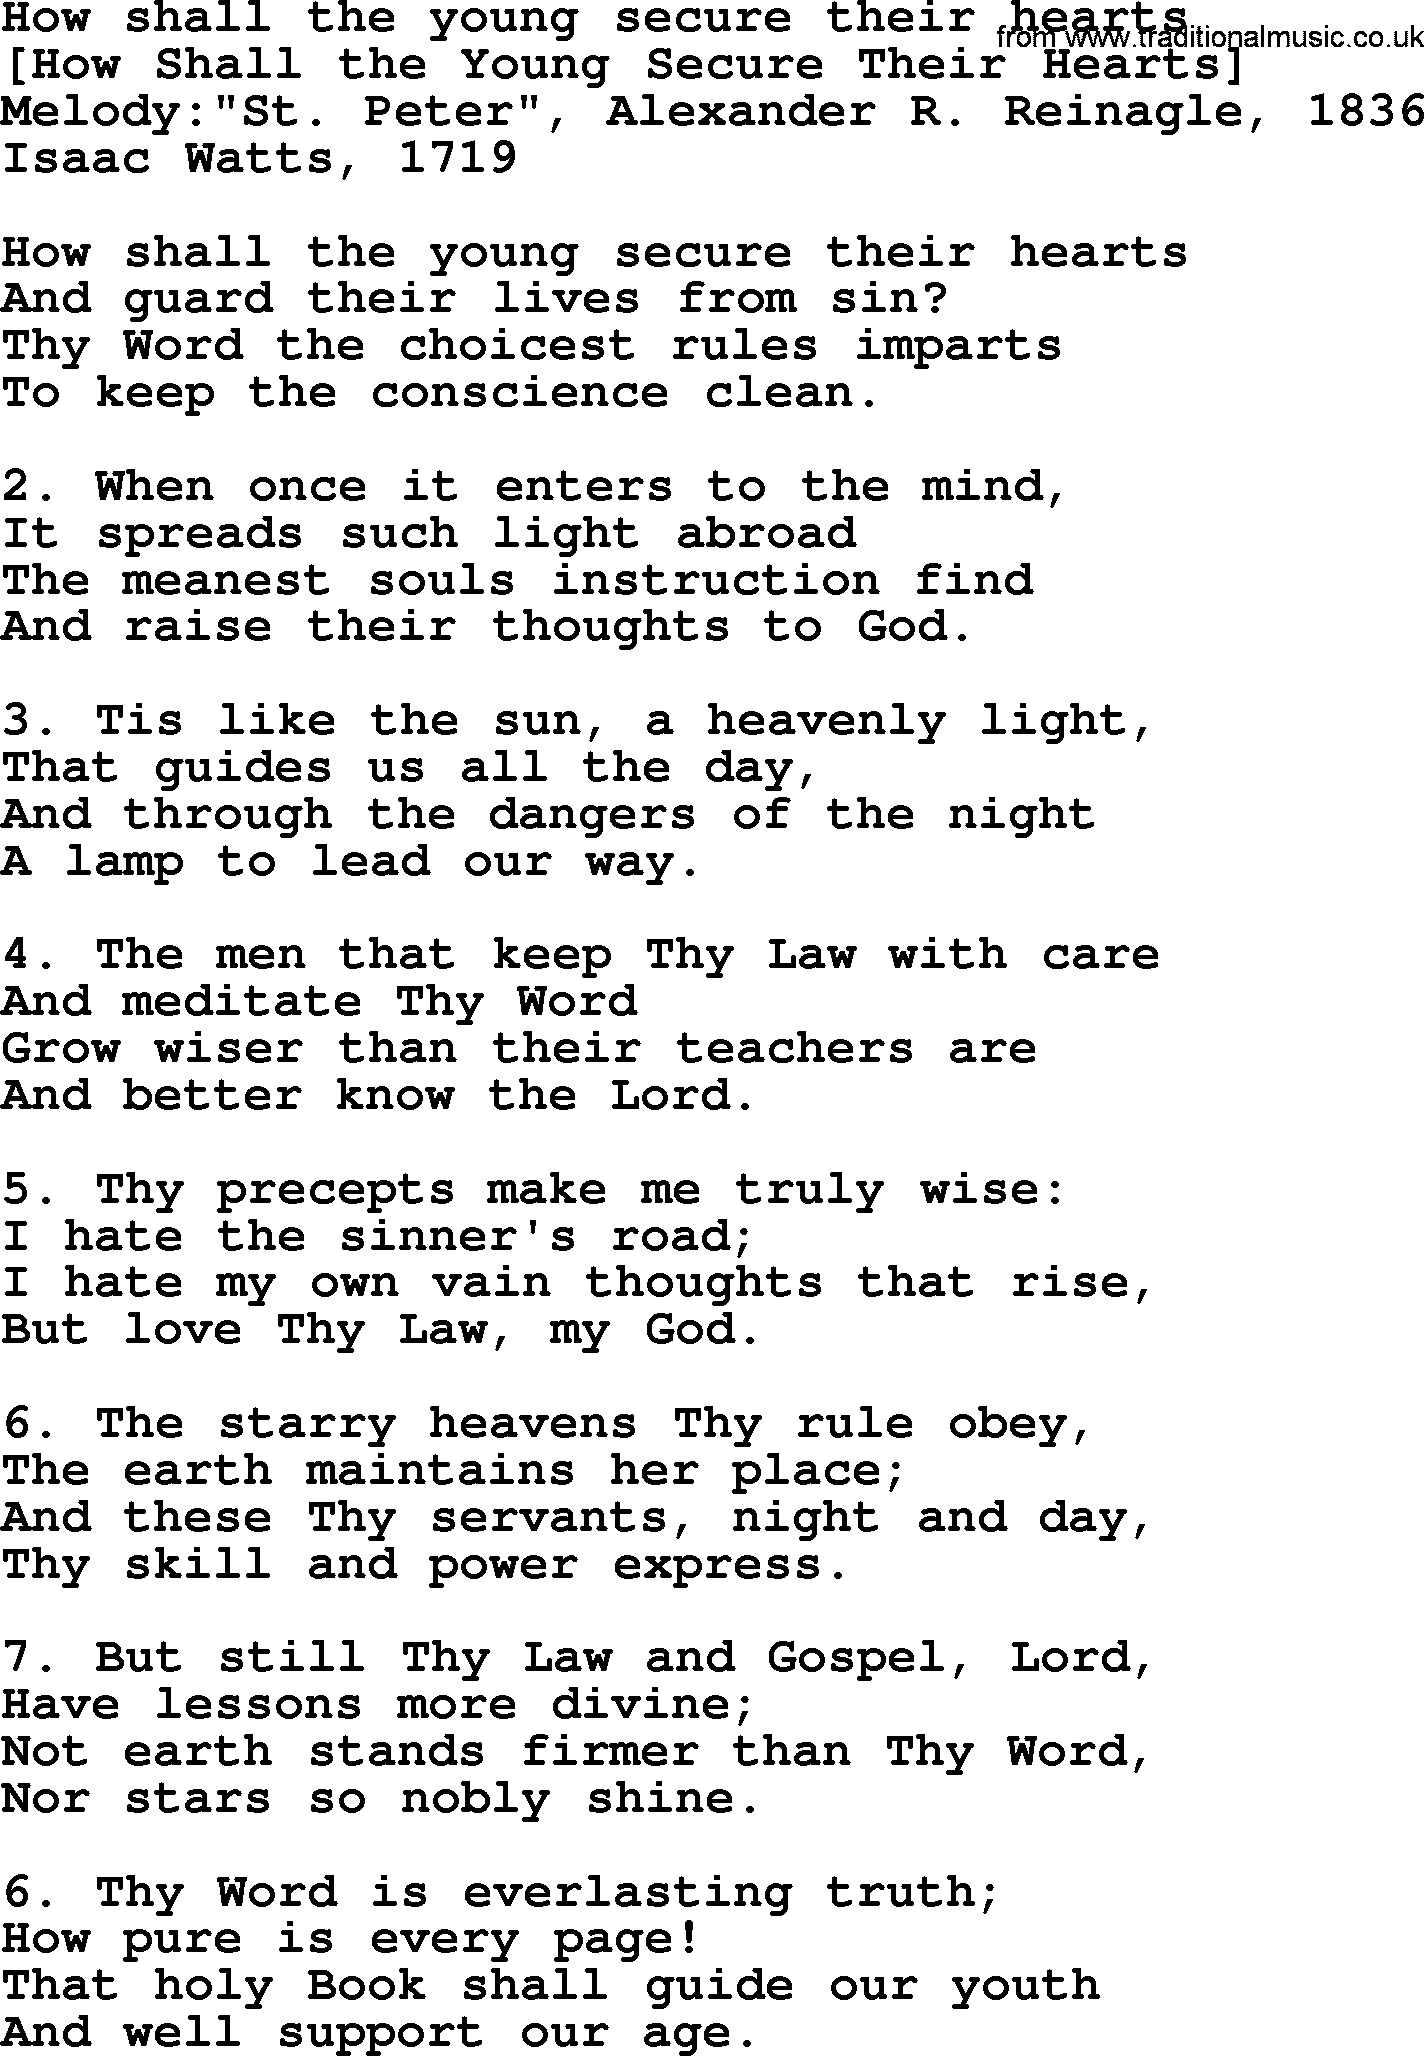 Old English Song: How Shall The Young Secure Their Hearts lyrics